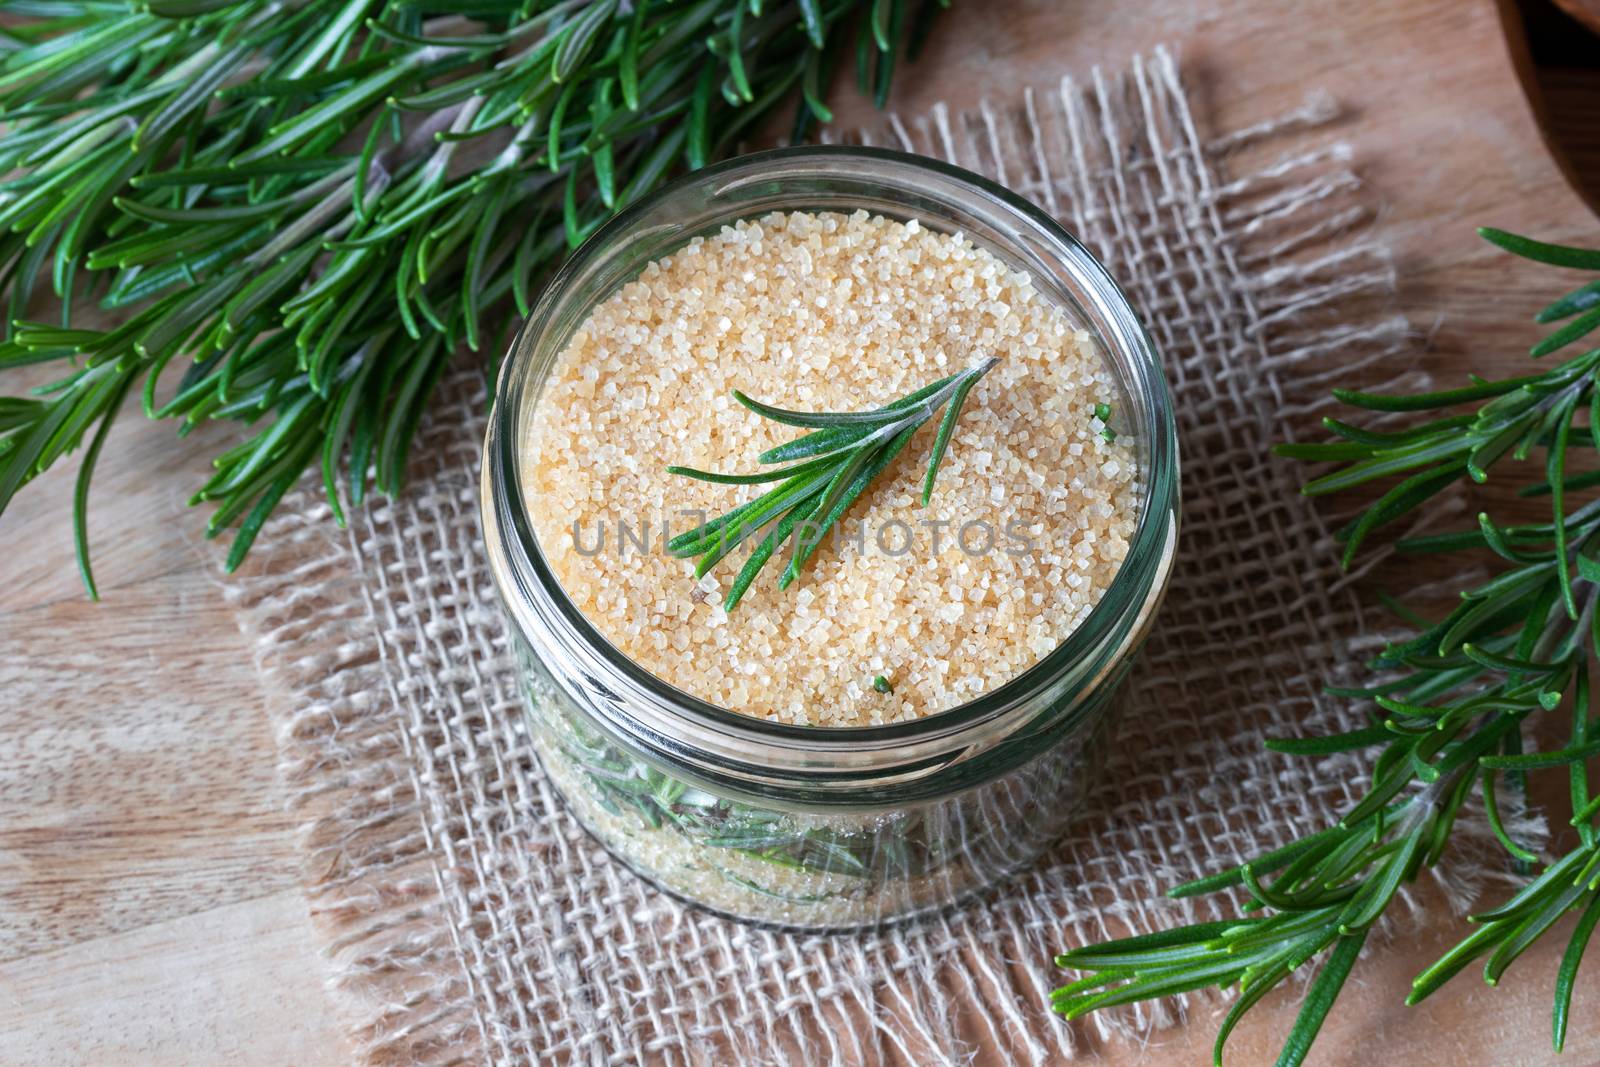 A jar filled with fresh rosemary and cane sugar, to prepare homemade herbal syrup